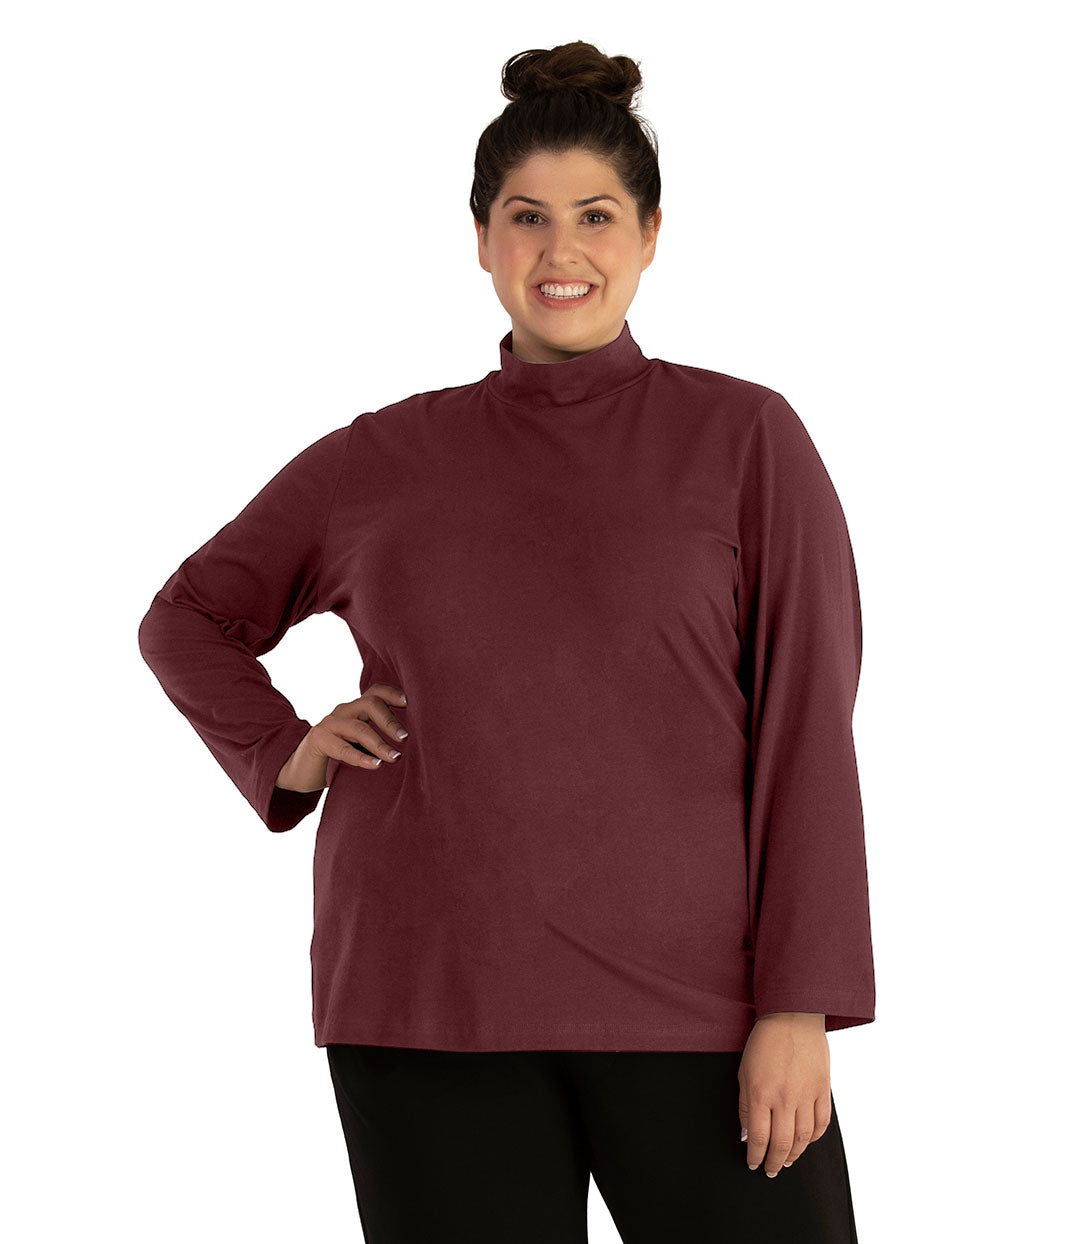 Plus size woman, facing front looking left, wearing JunoActive plus size Stretch Naturals Lite Mock Neck Top in the color Chestnut. She is wearing JunoActive Plus Size Leggings in the color Black.